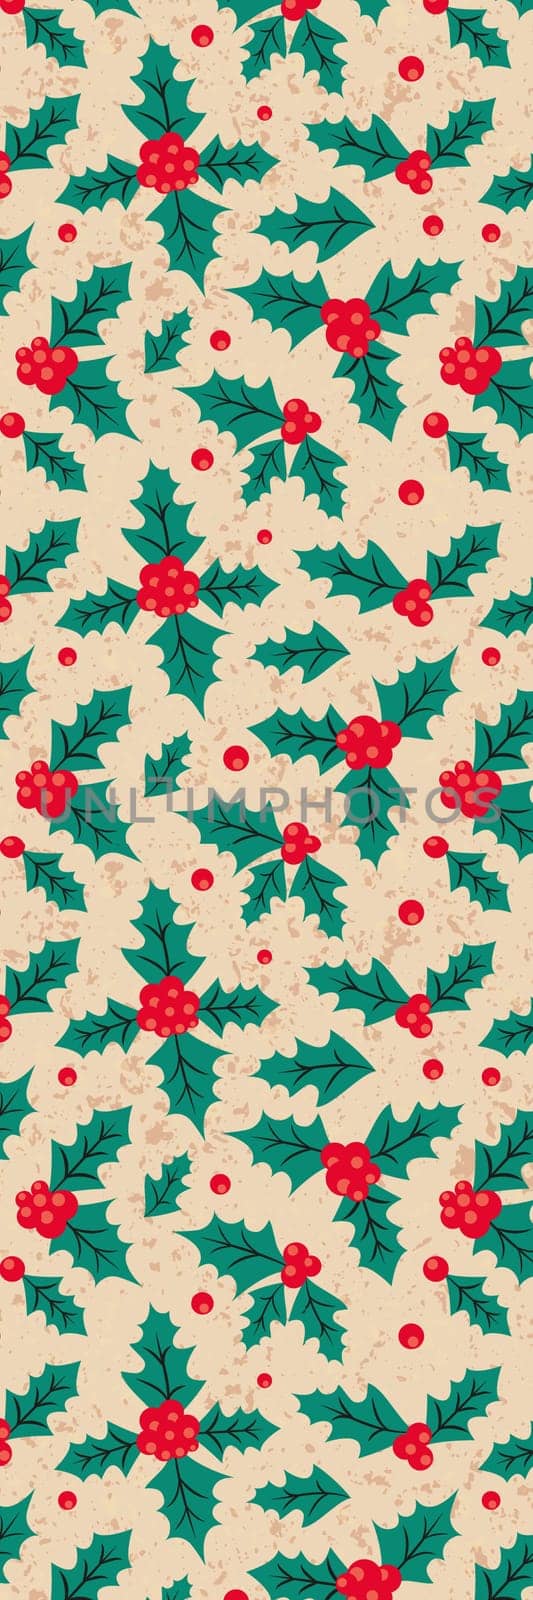 Retro Christmas holly Bookmark by Dustick